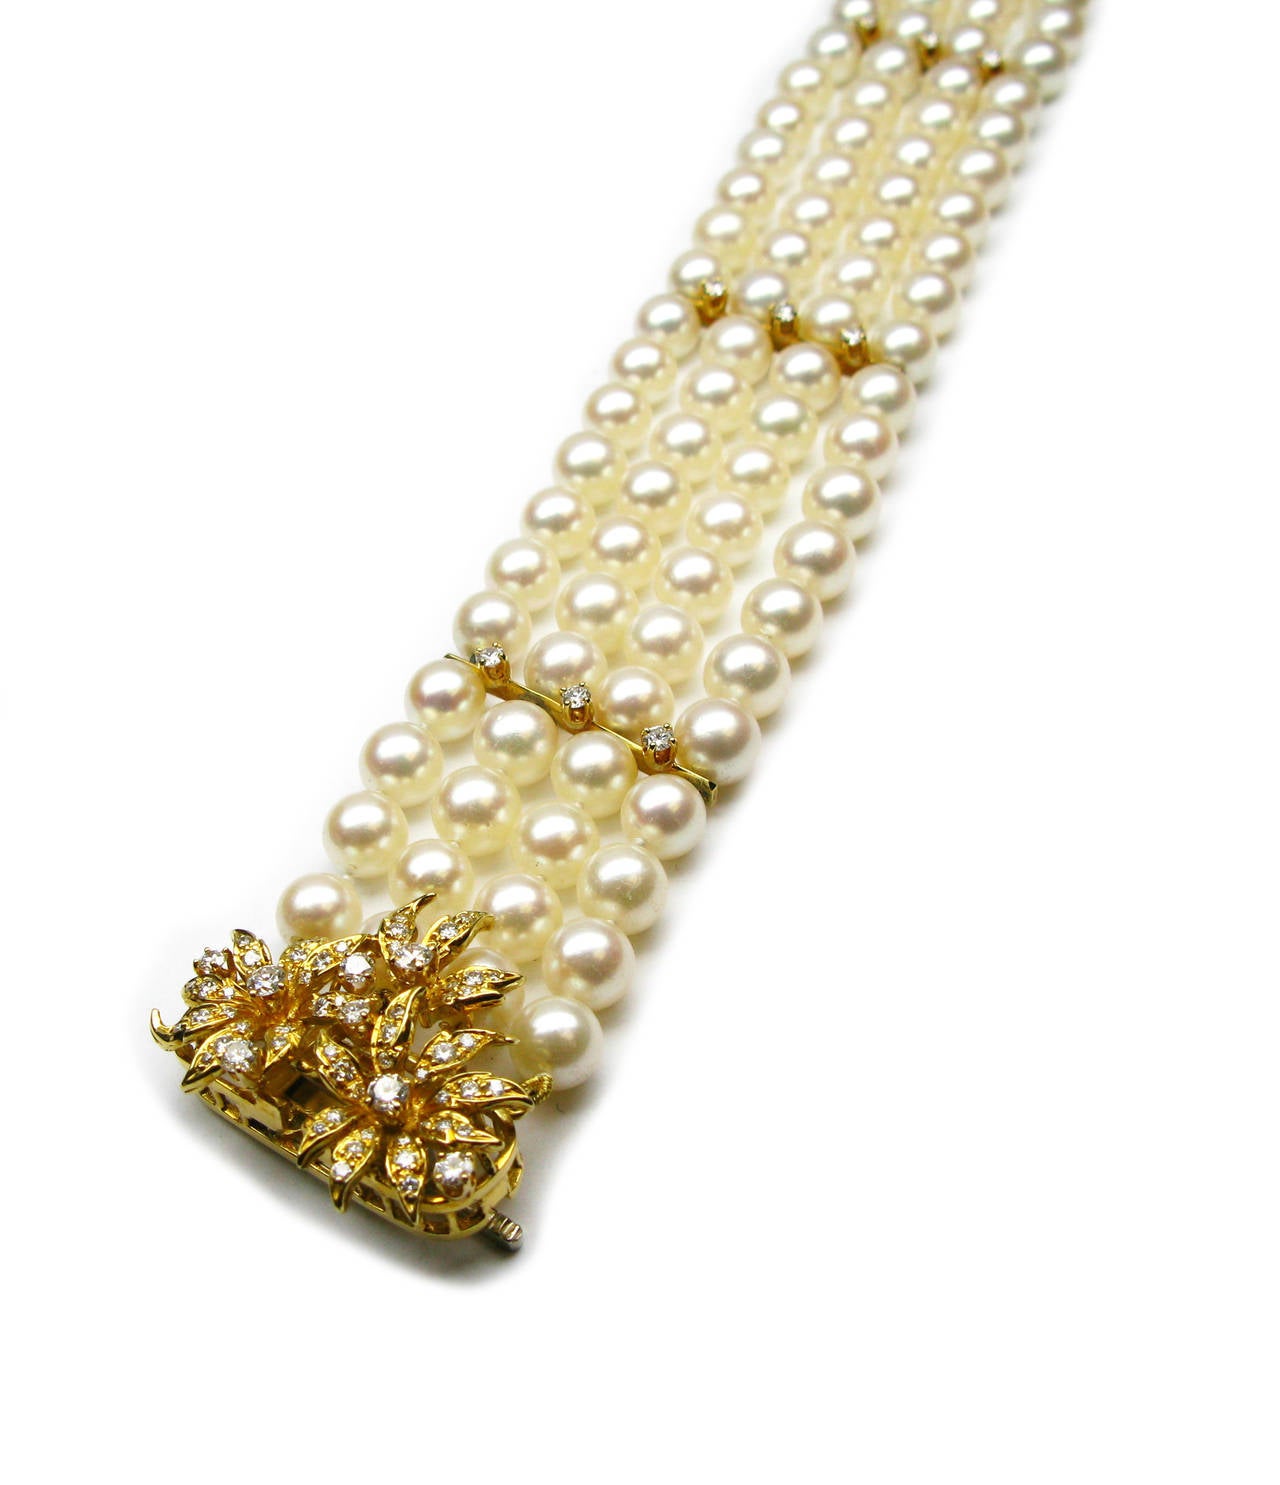 This stunning one-of-a-kind 18kt yellow gold bracelet is part of the Kurt Wayne collection. It features four strands of 6.5mm cream colored cultured pearls with three diamond accented bars and a spectacular diamond encrusted flower clasp with